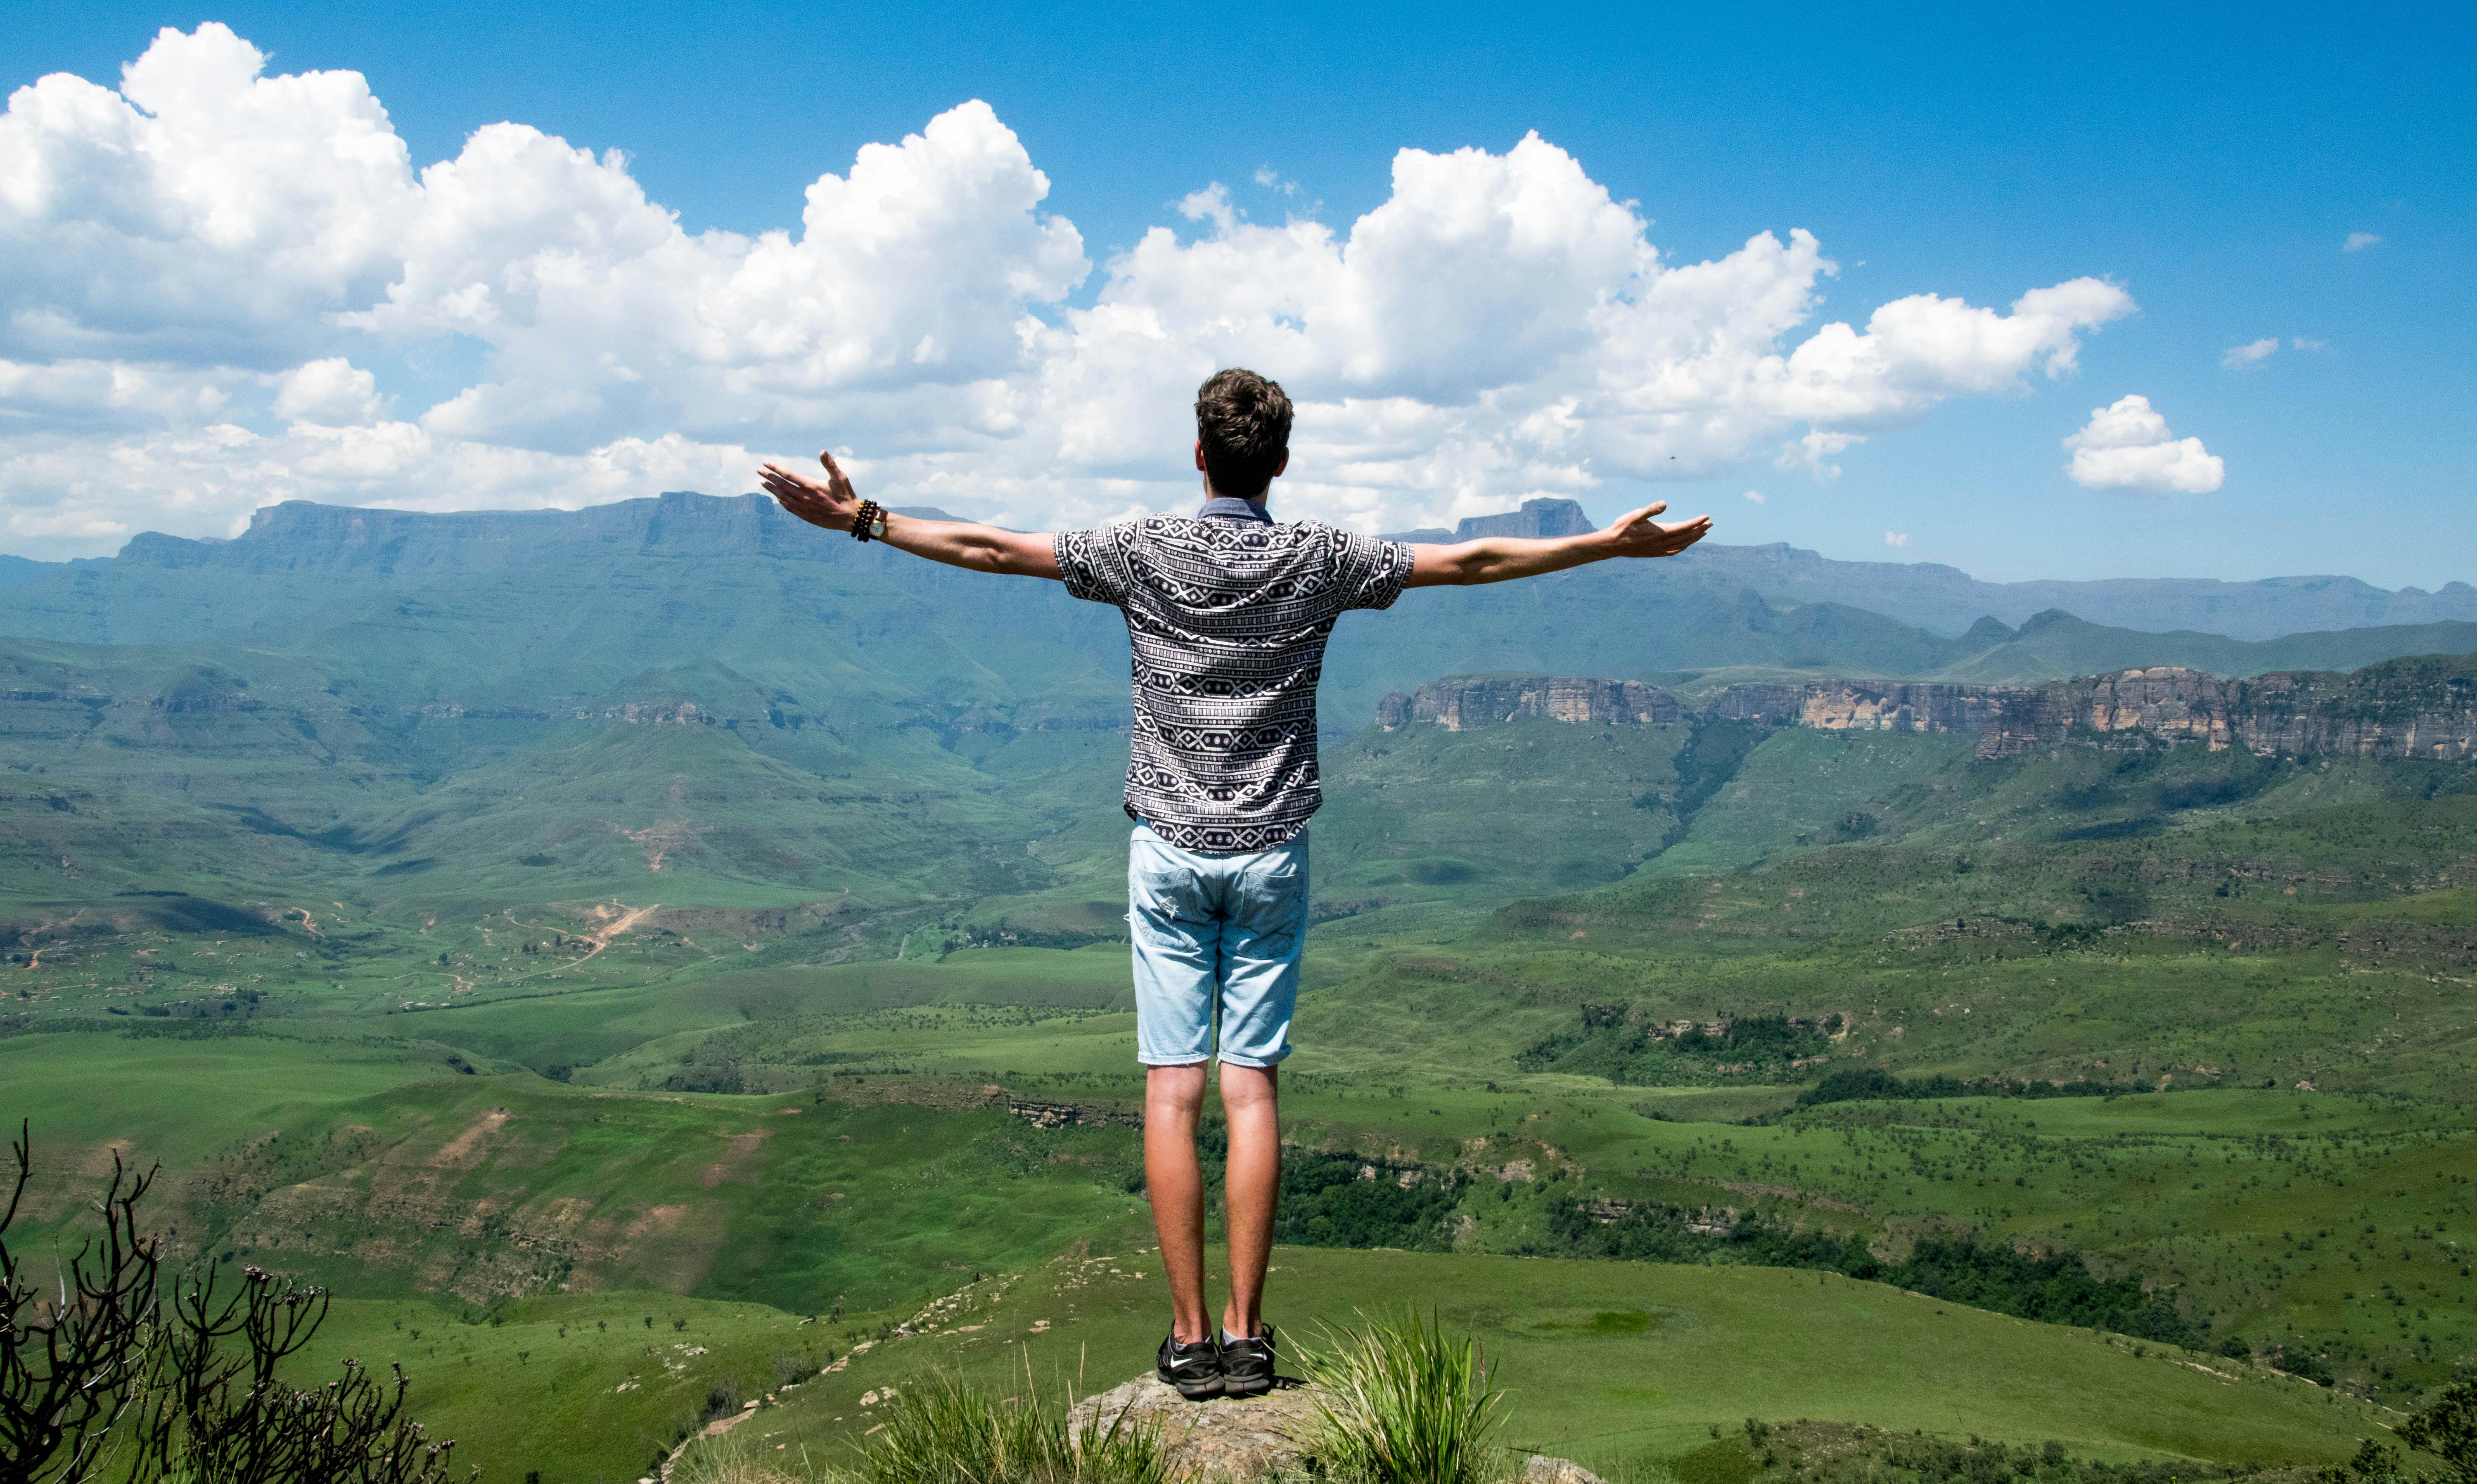 Man with back to the camera stood with arms outstretched. The man is up high and there is a view of the countryside and mountains in the distance.